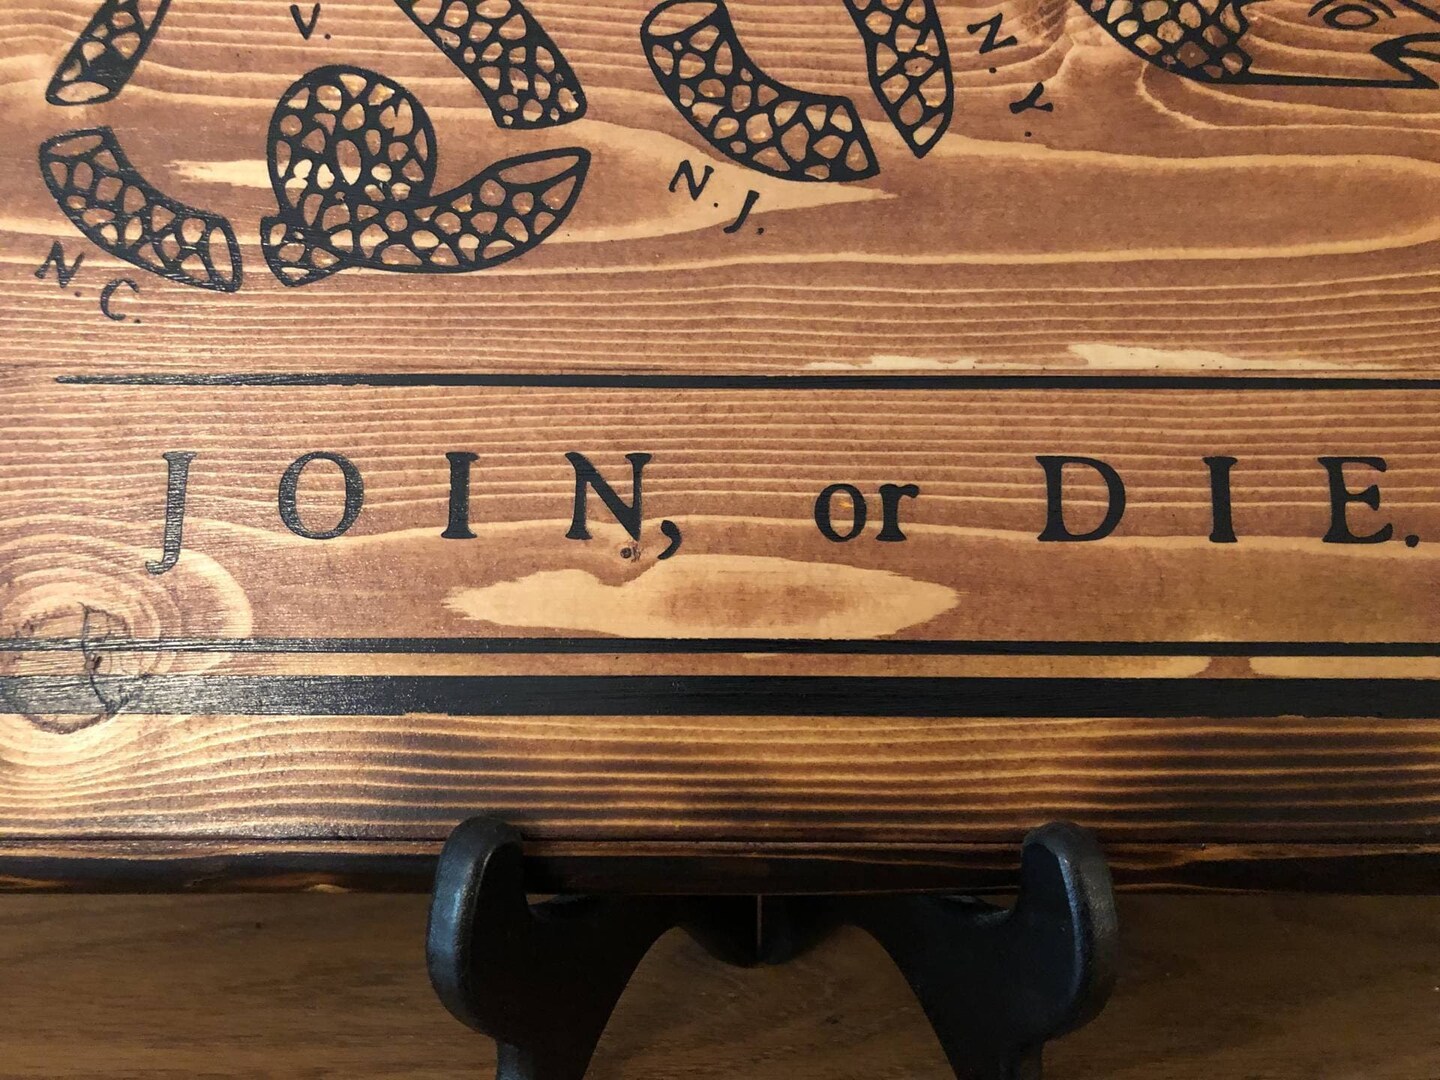 Handmade Rustic join or Die Wood Plank Sign With Decorative Edging